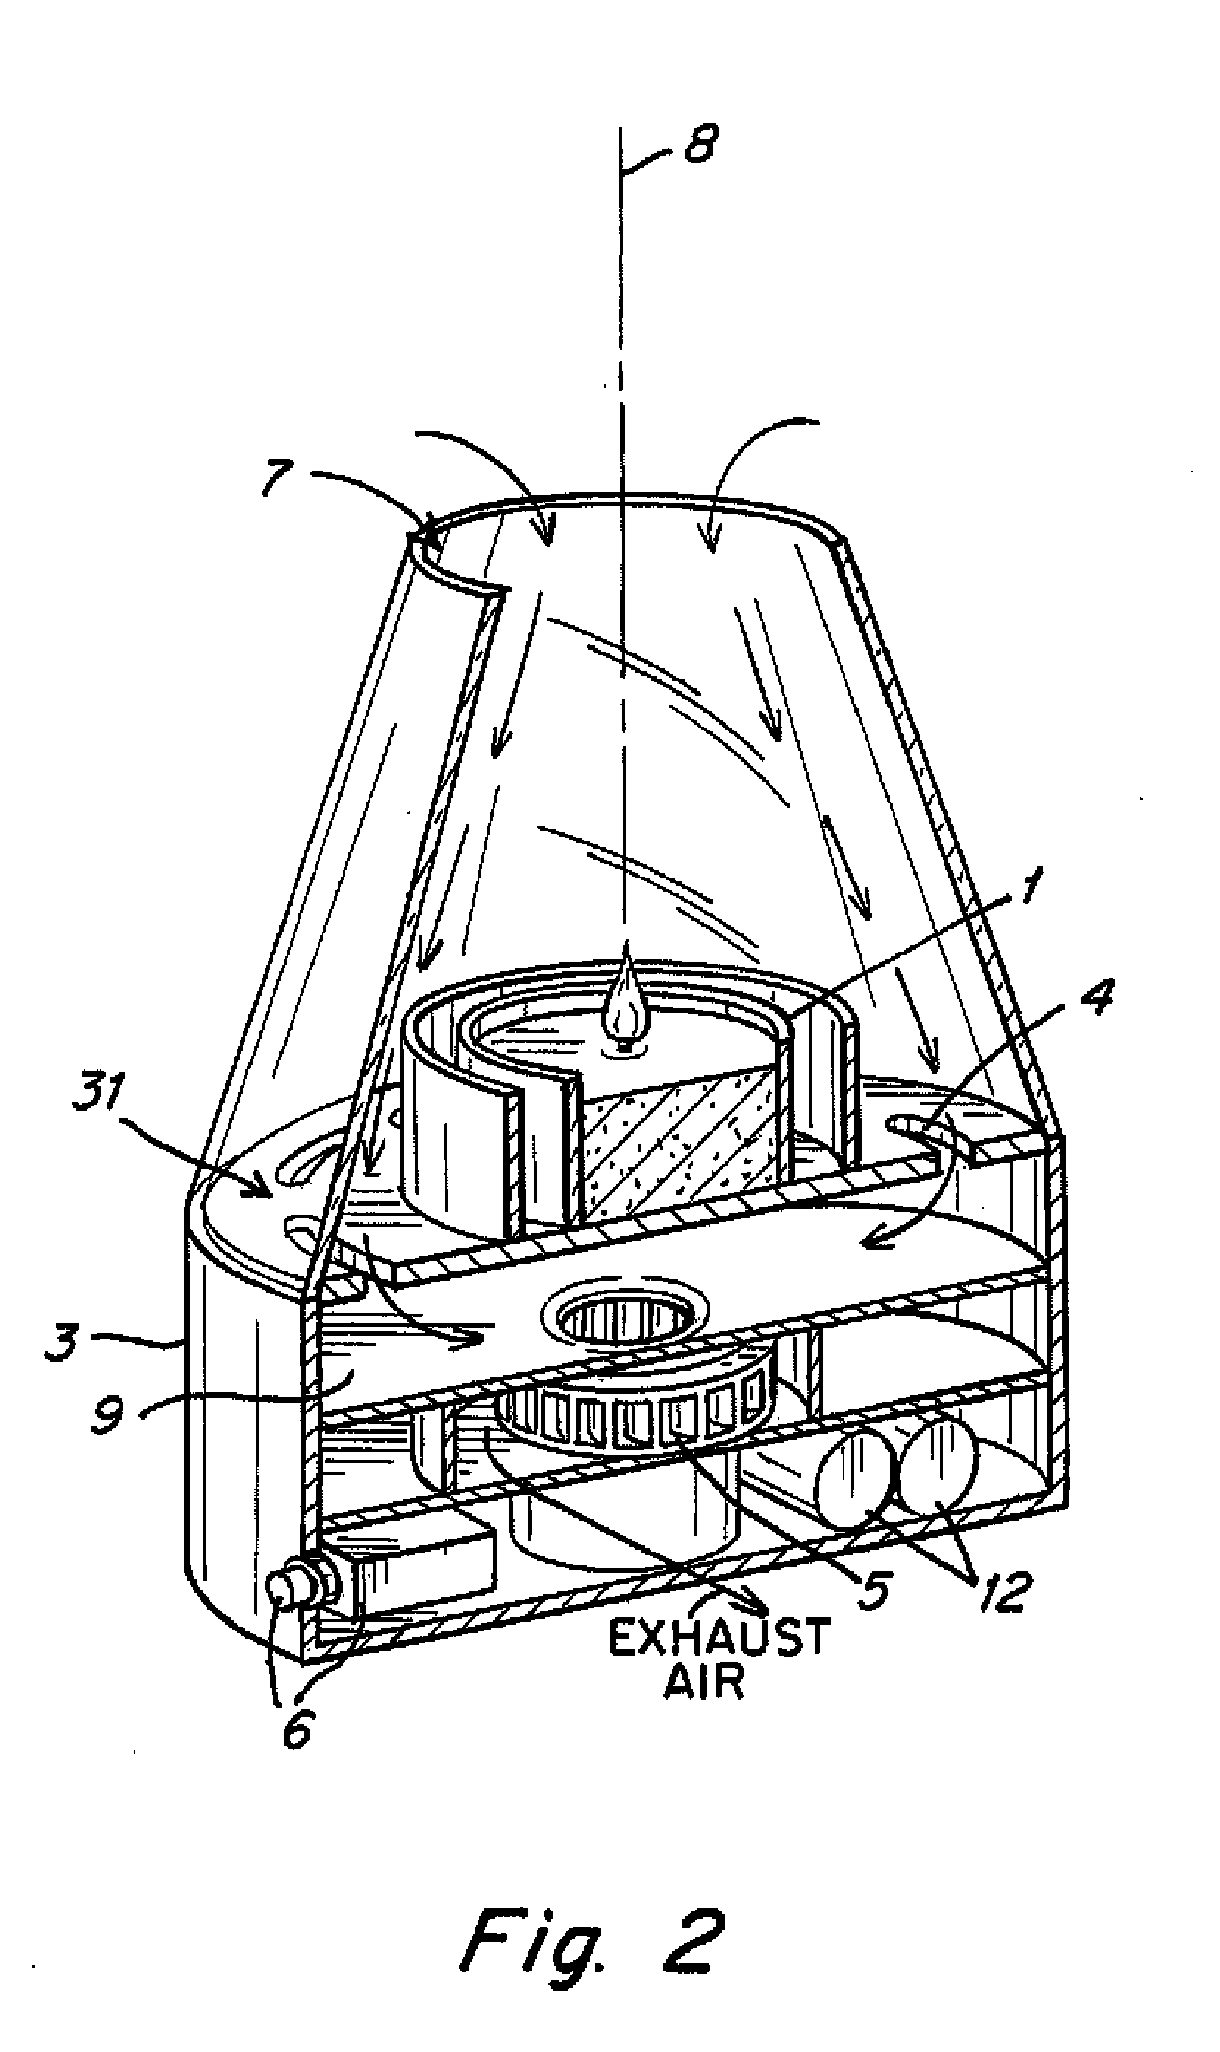 Method and apparatus for diffusing the fragrance of a burning candle